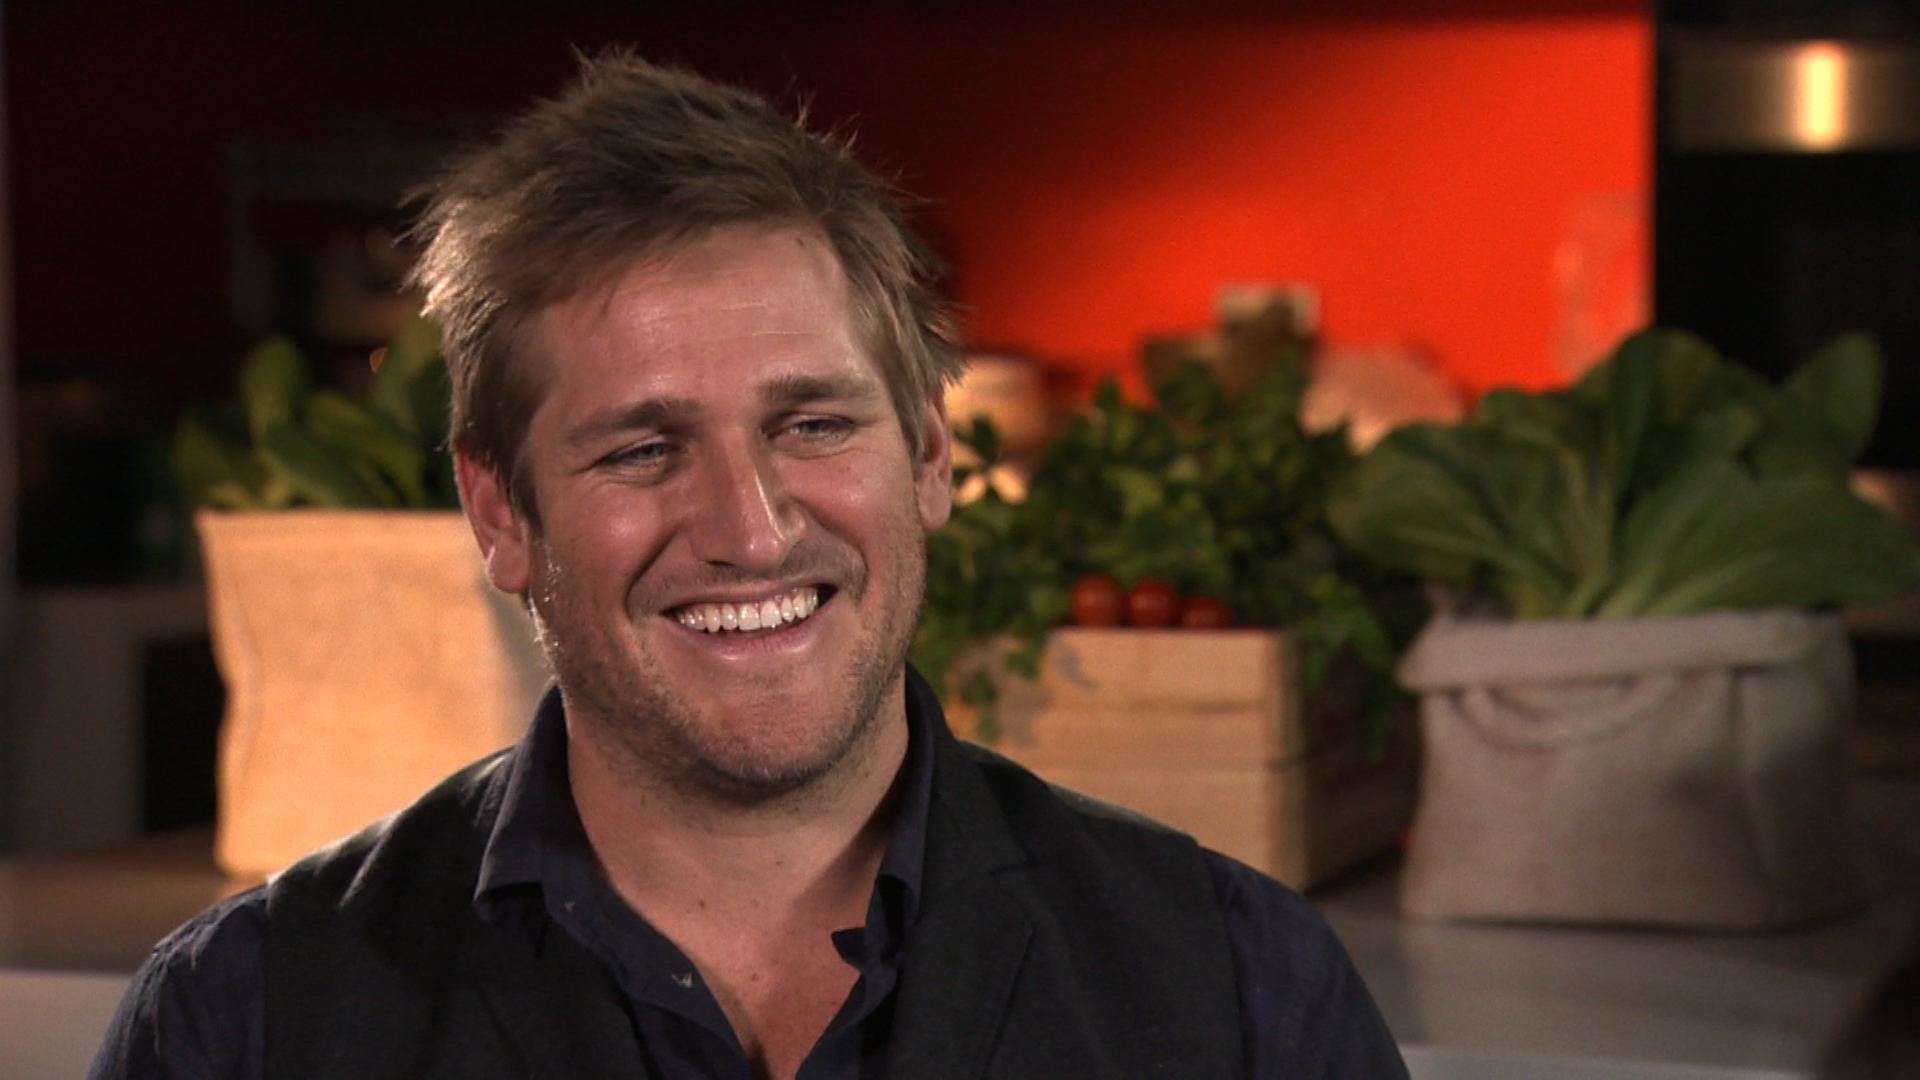   Curtis Stone  image - supplied 